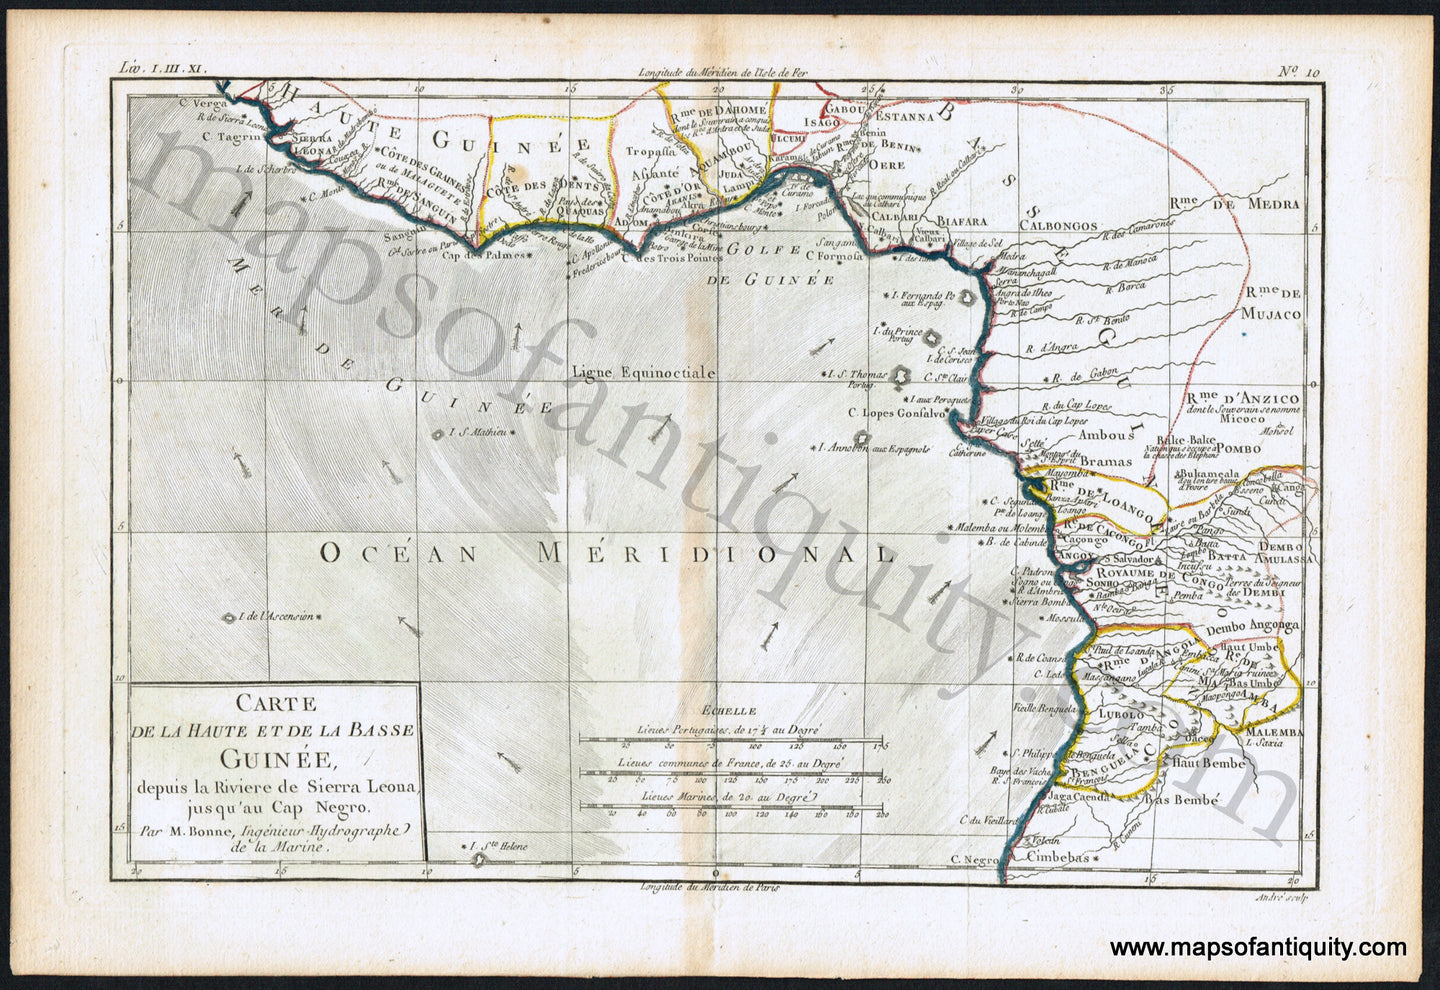 Antique-Hand-Colored-Map-Carte-de-la-Haute-et-Basse-Guinee-Africa-Africa-Africa-Other-1780-Raynal-and-Bonne-Maps-Of-Antiquity